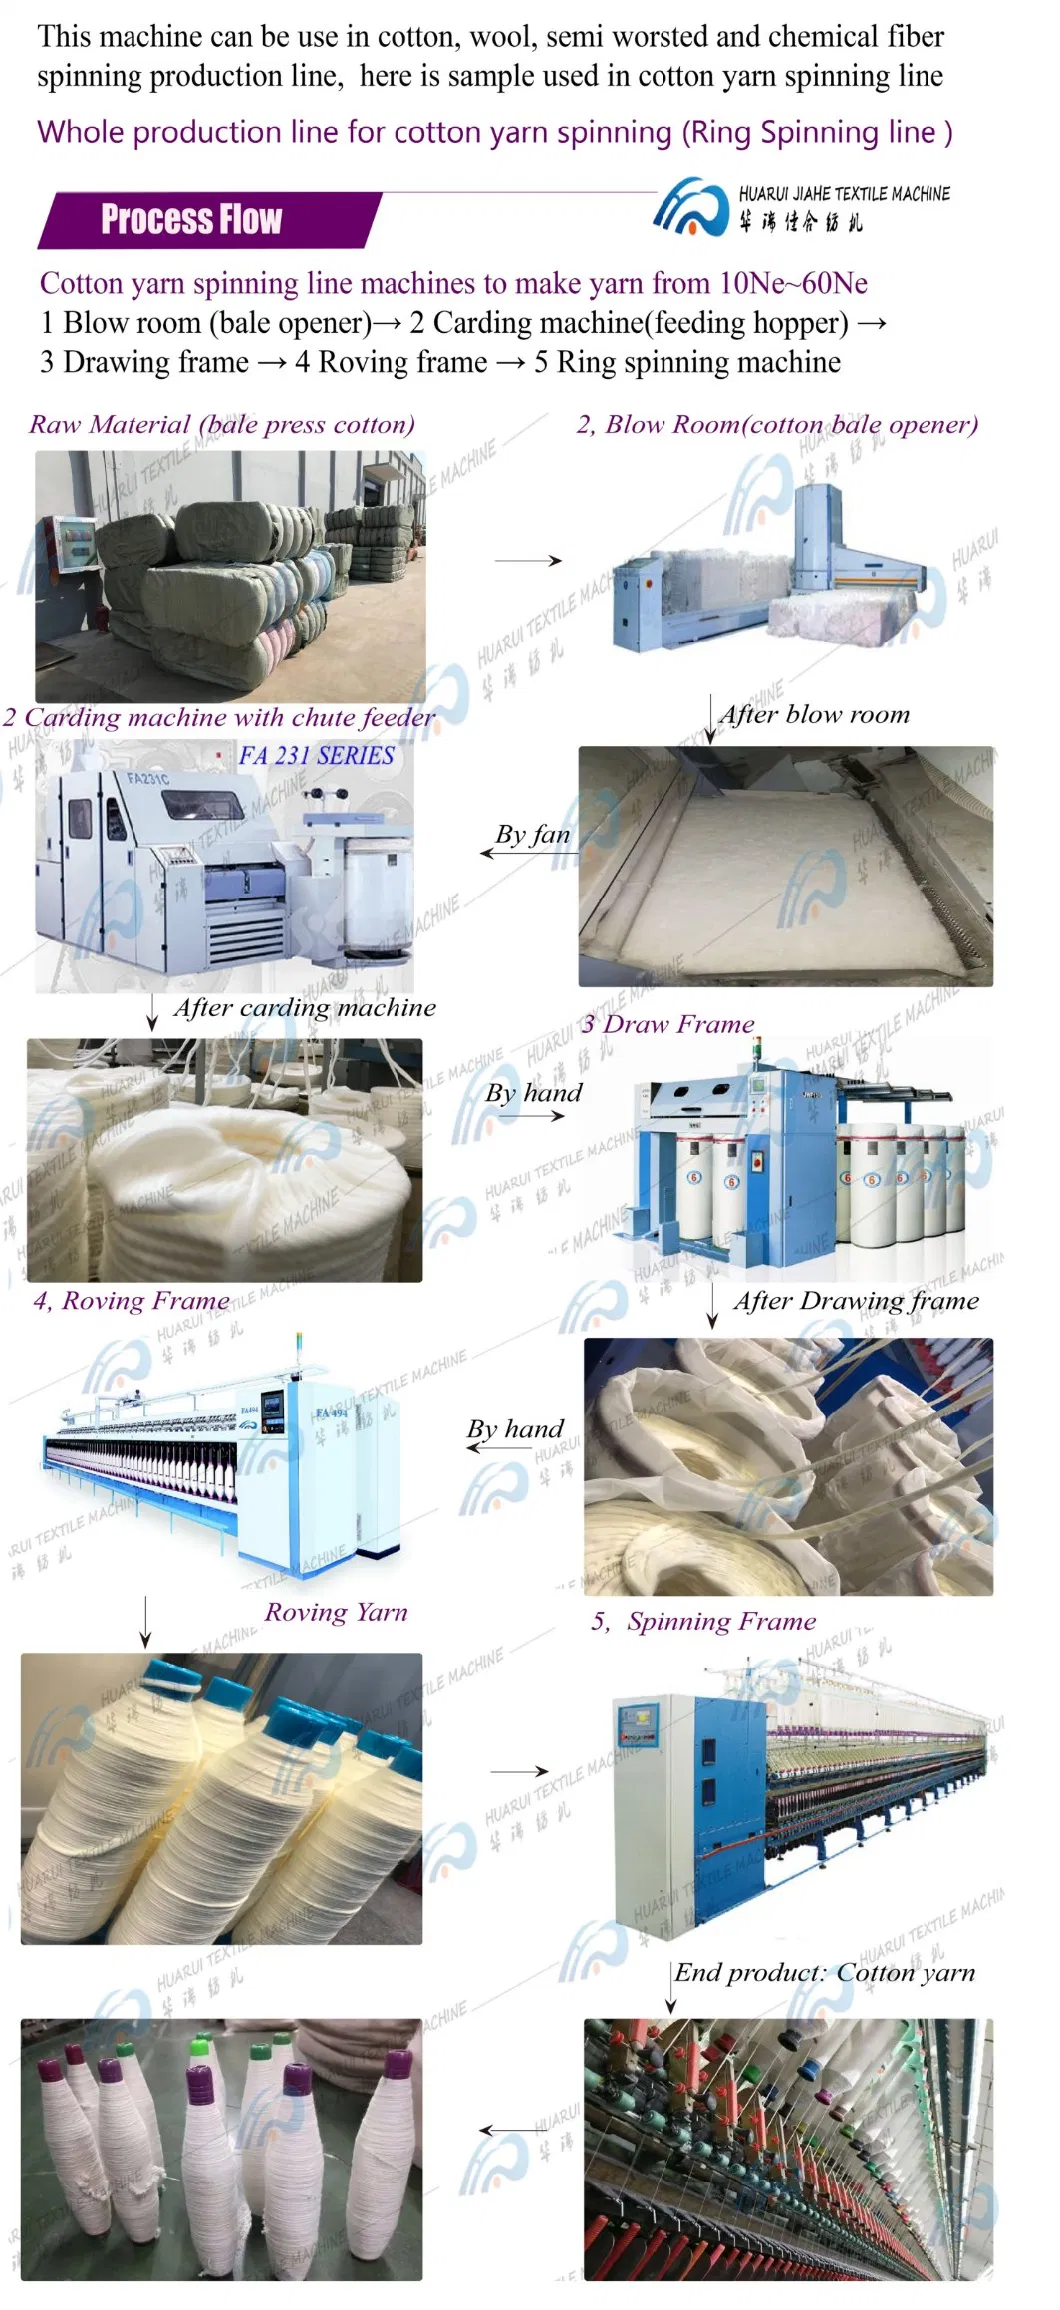 Fully Automated Textile Fabrics Beam Rolling Dye Machine Specially Used for Printing and Dyeing Desizing, Dyeing, Washing, Bleaching